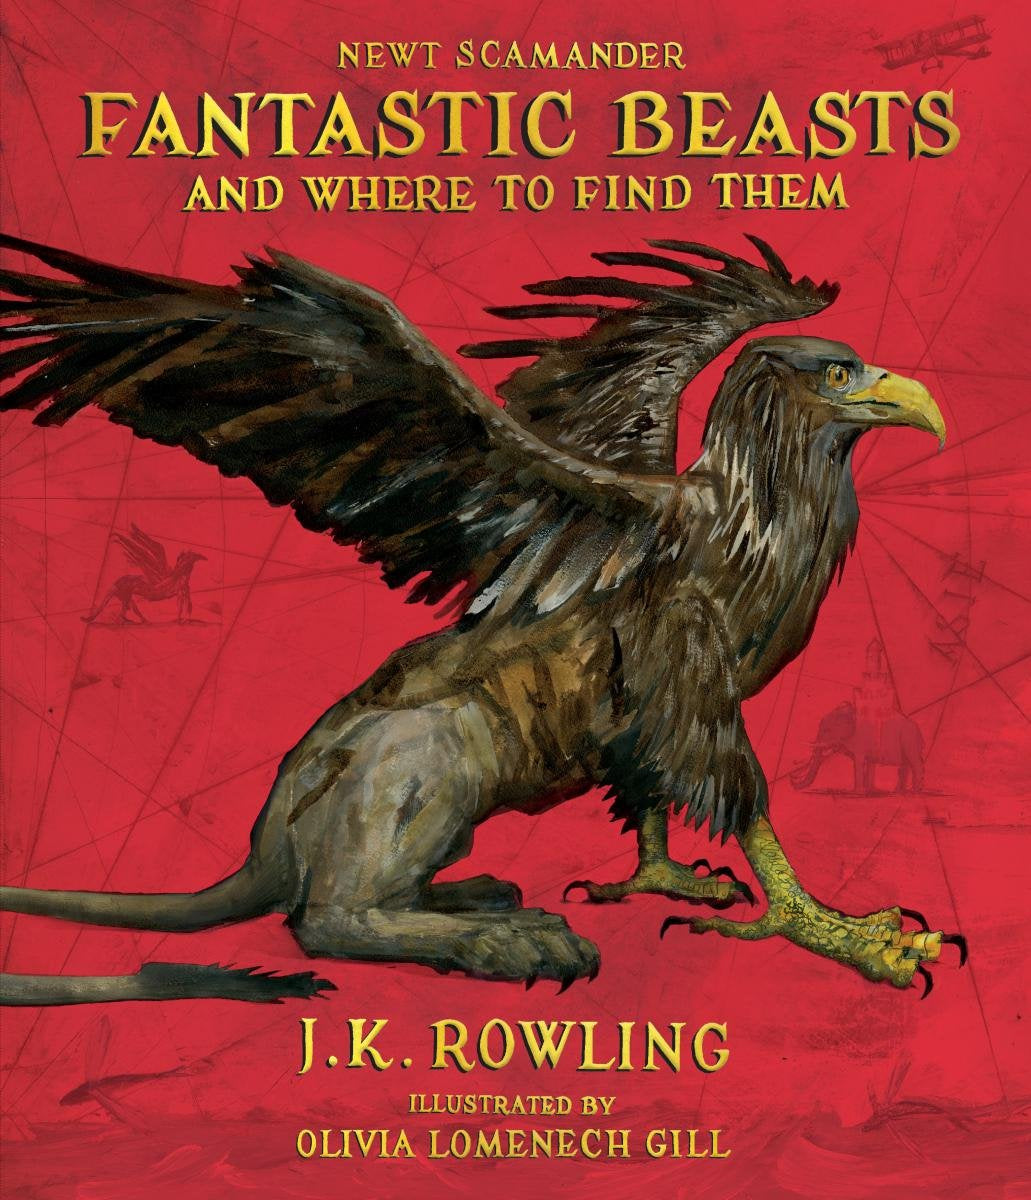 Fantastic Beasts and Where to Find Them (Harry Potter) Hardcover